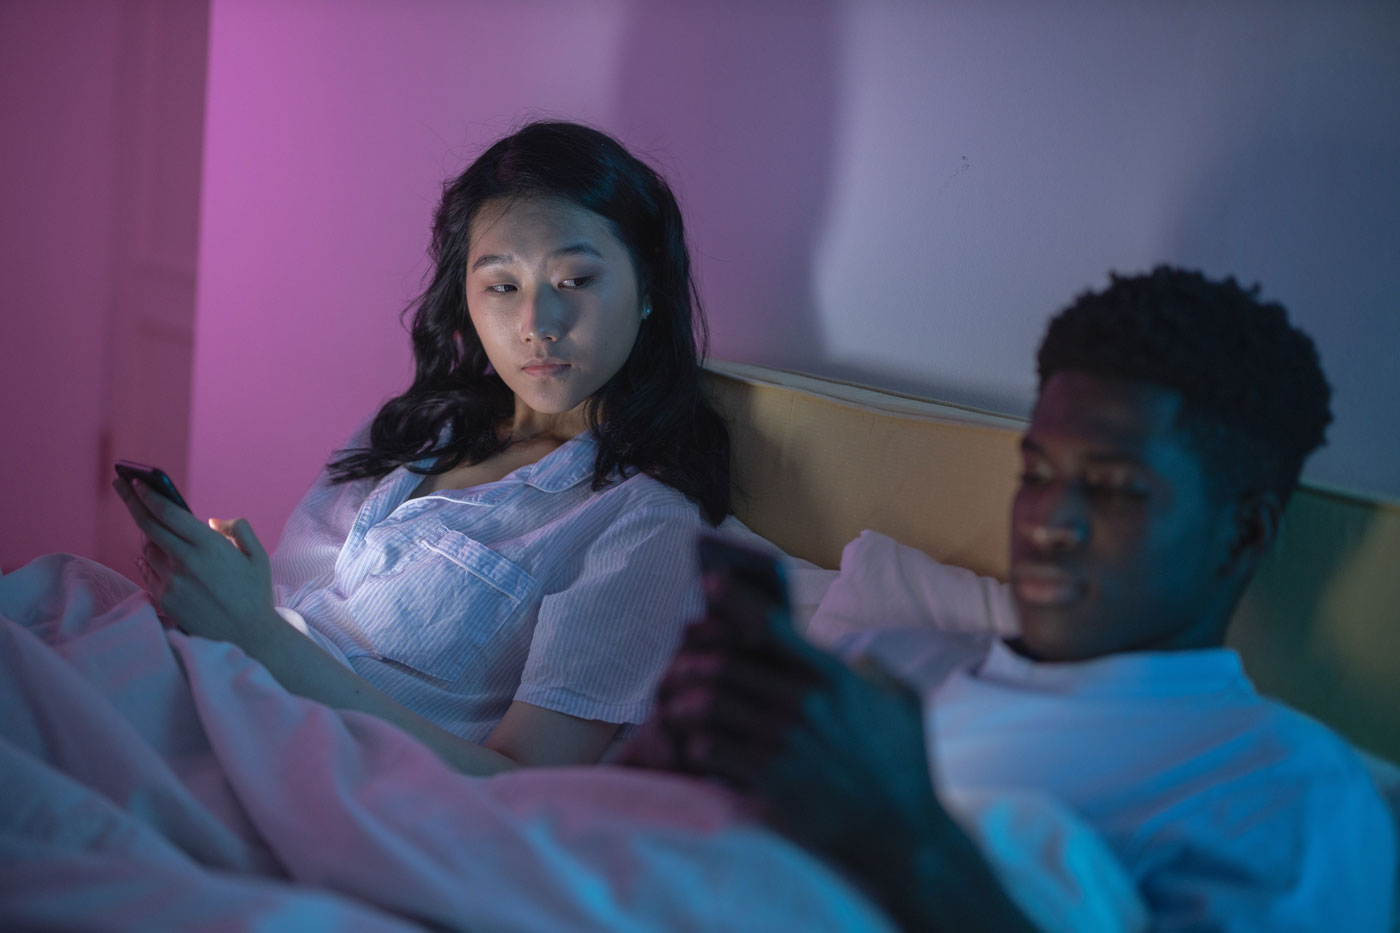 Two people sitting in purple-colored light and white shirts in bed looking at their phone